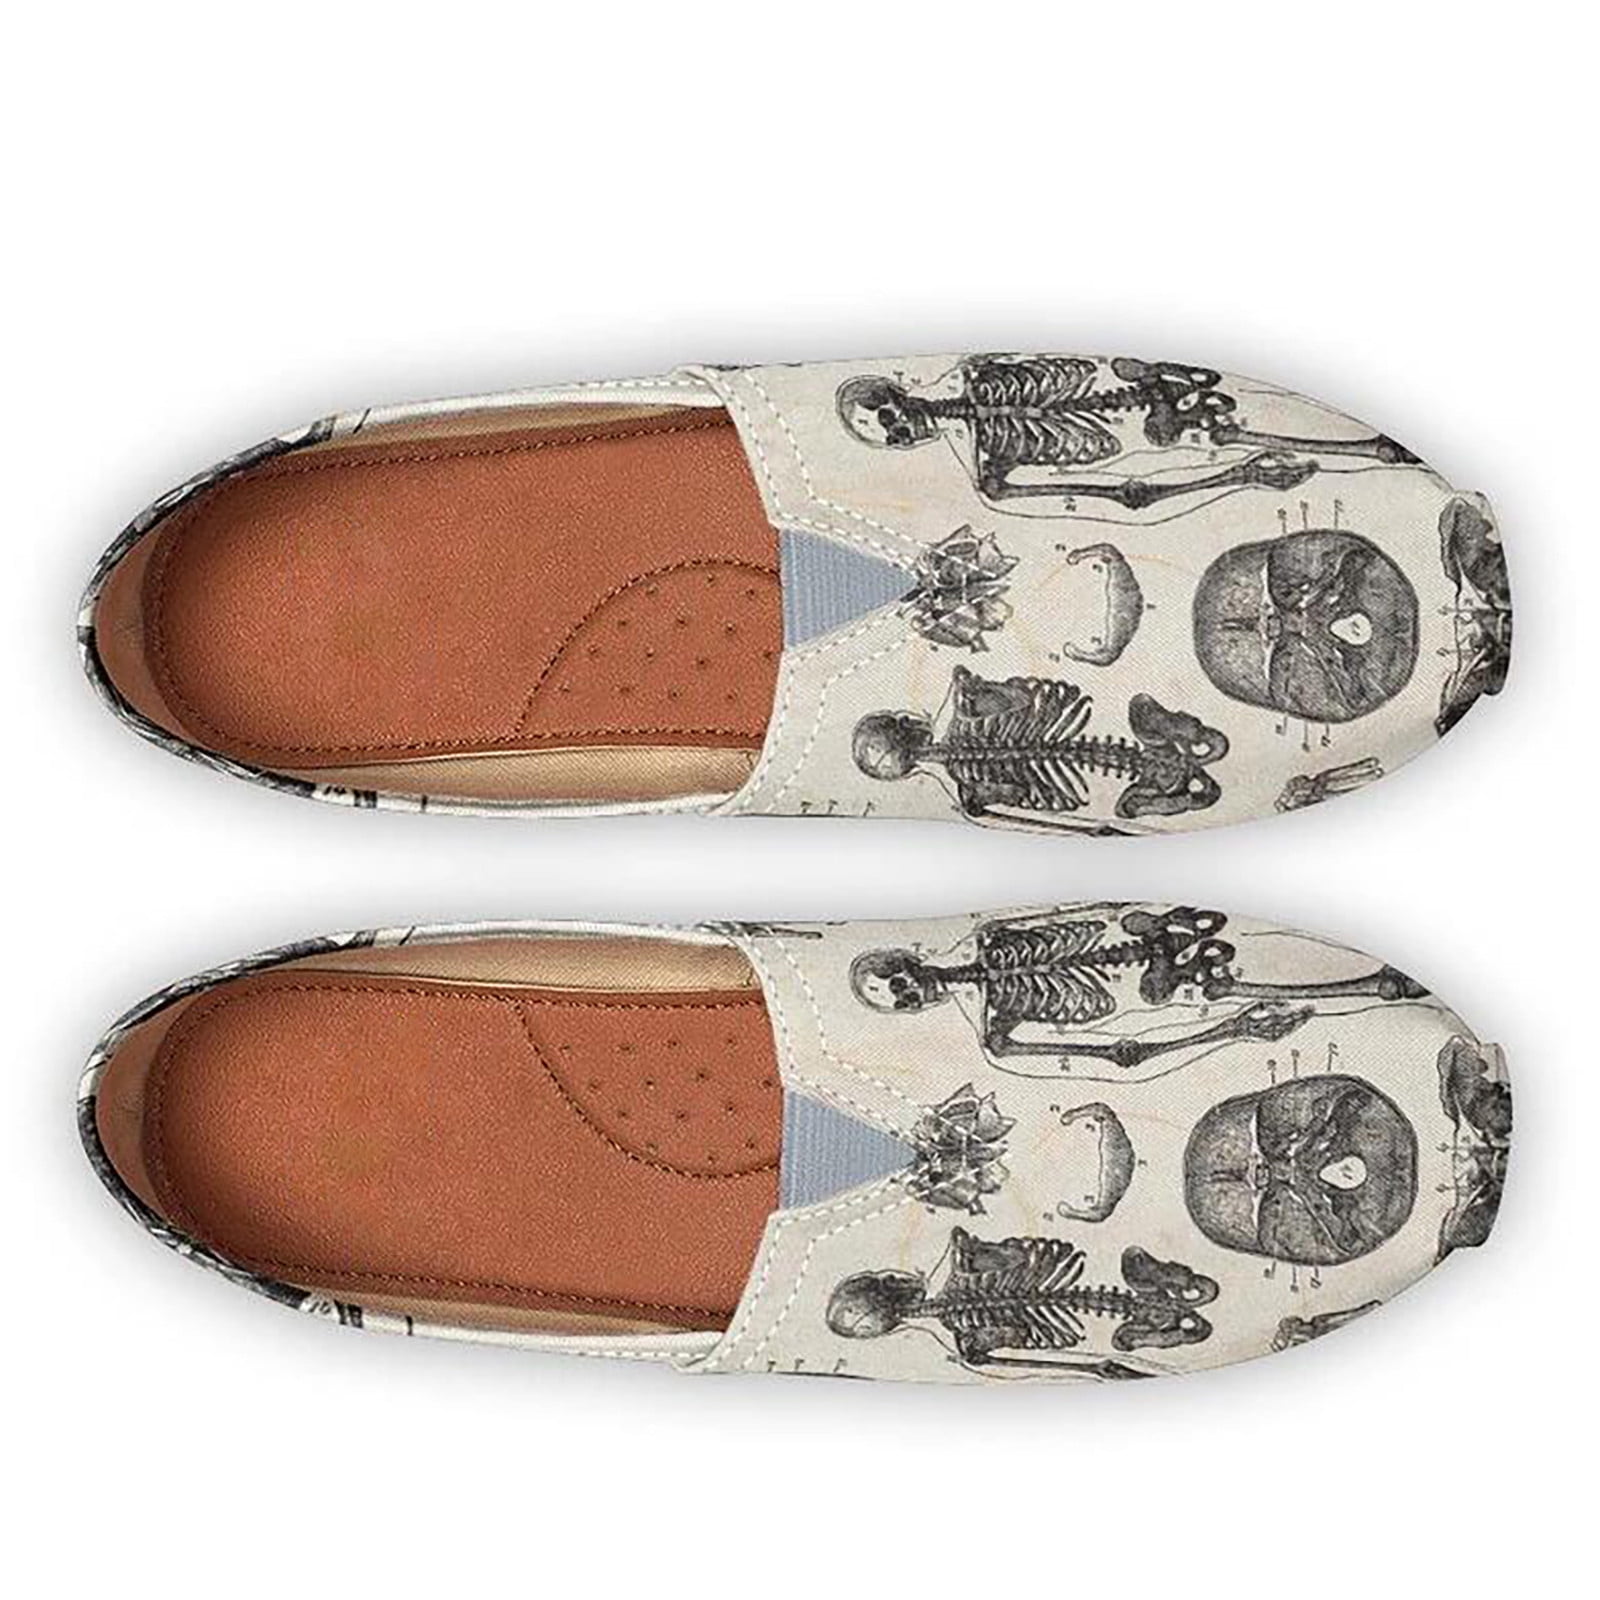 Human Organ Casual Shoes Human Organ Canvas Casual Shoes With Full Wrap Canvas Print Vintage Anatomy Casual Shoes Slip On Flats Shoes for Women Men 